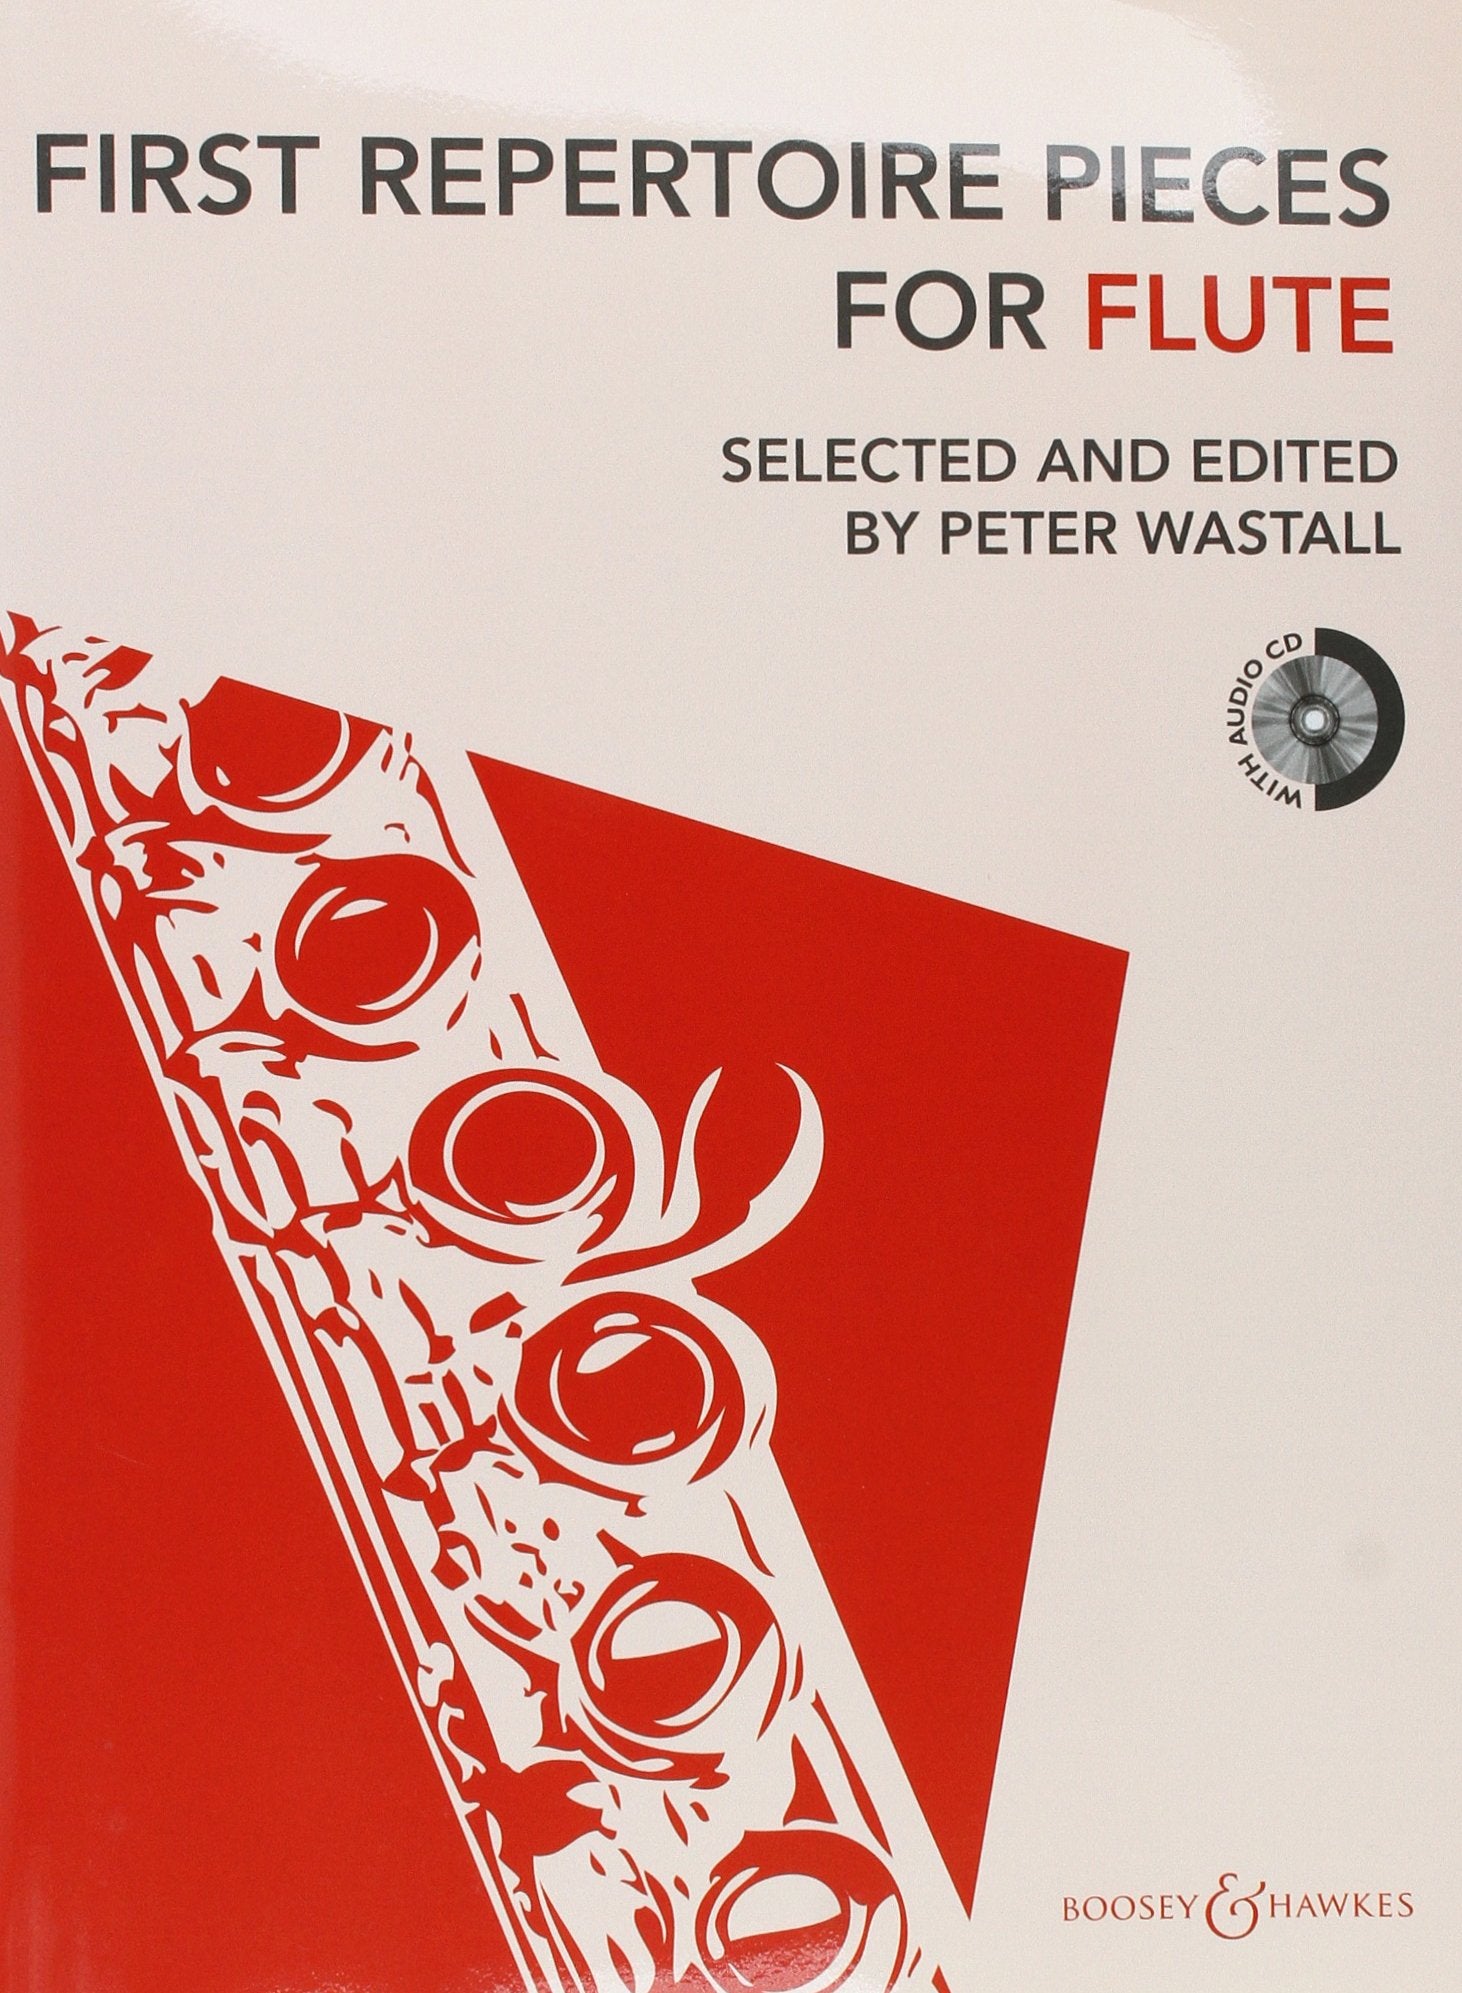 First Repertoire Pieces for Flute (New Edition)